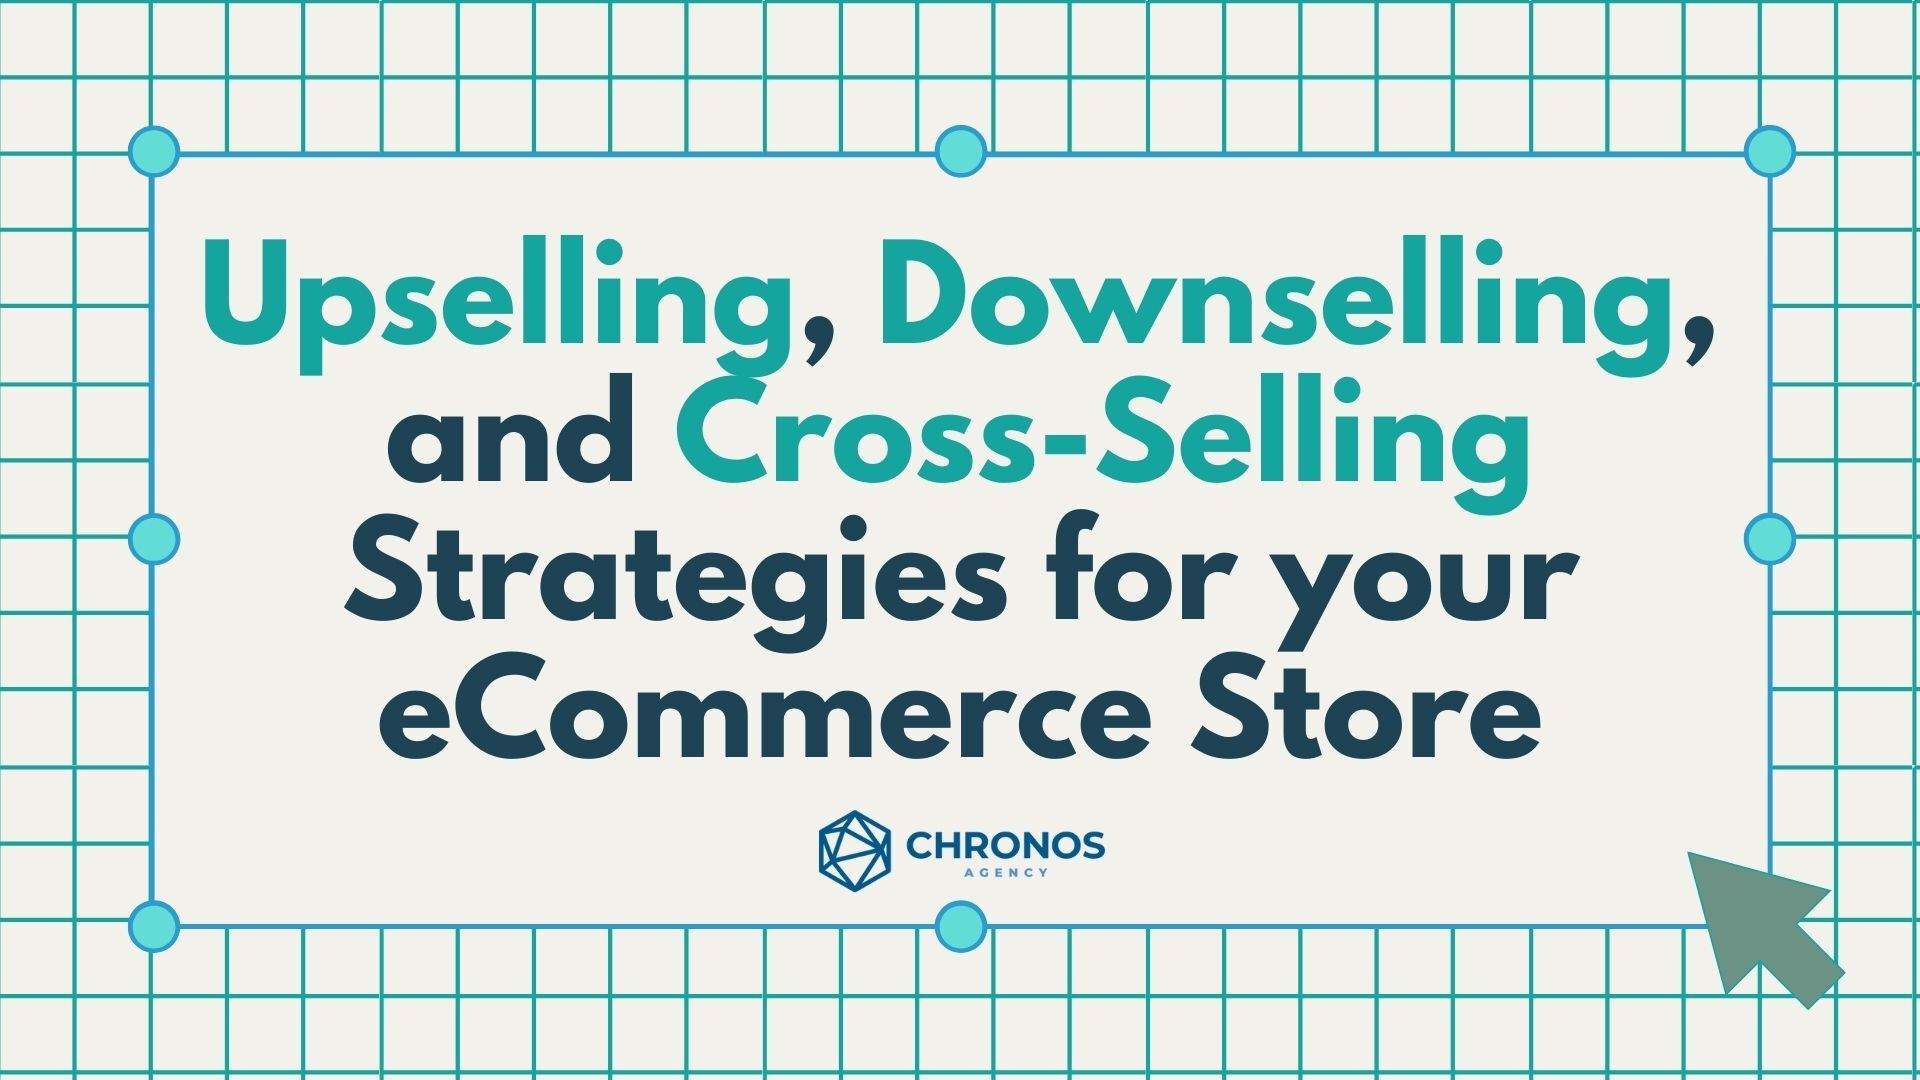 upselling, downselling, and cross-selling chronos blog featured